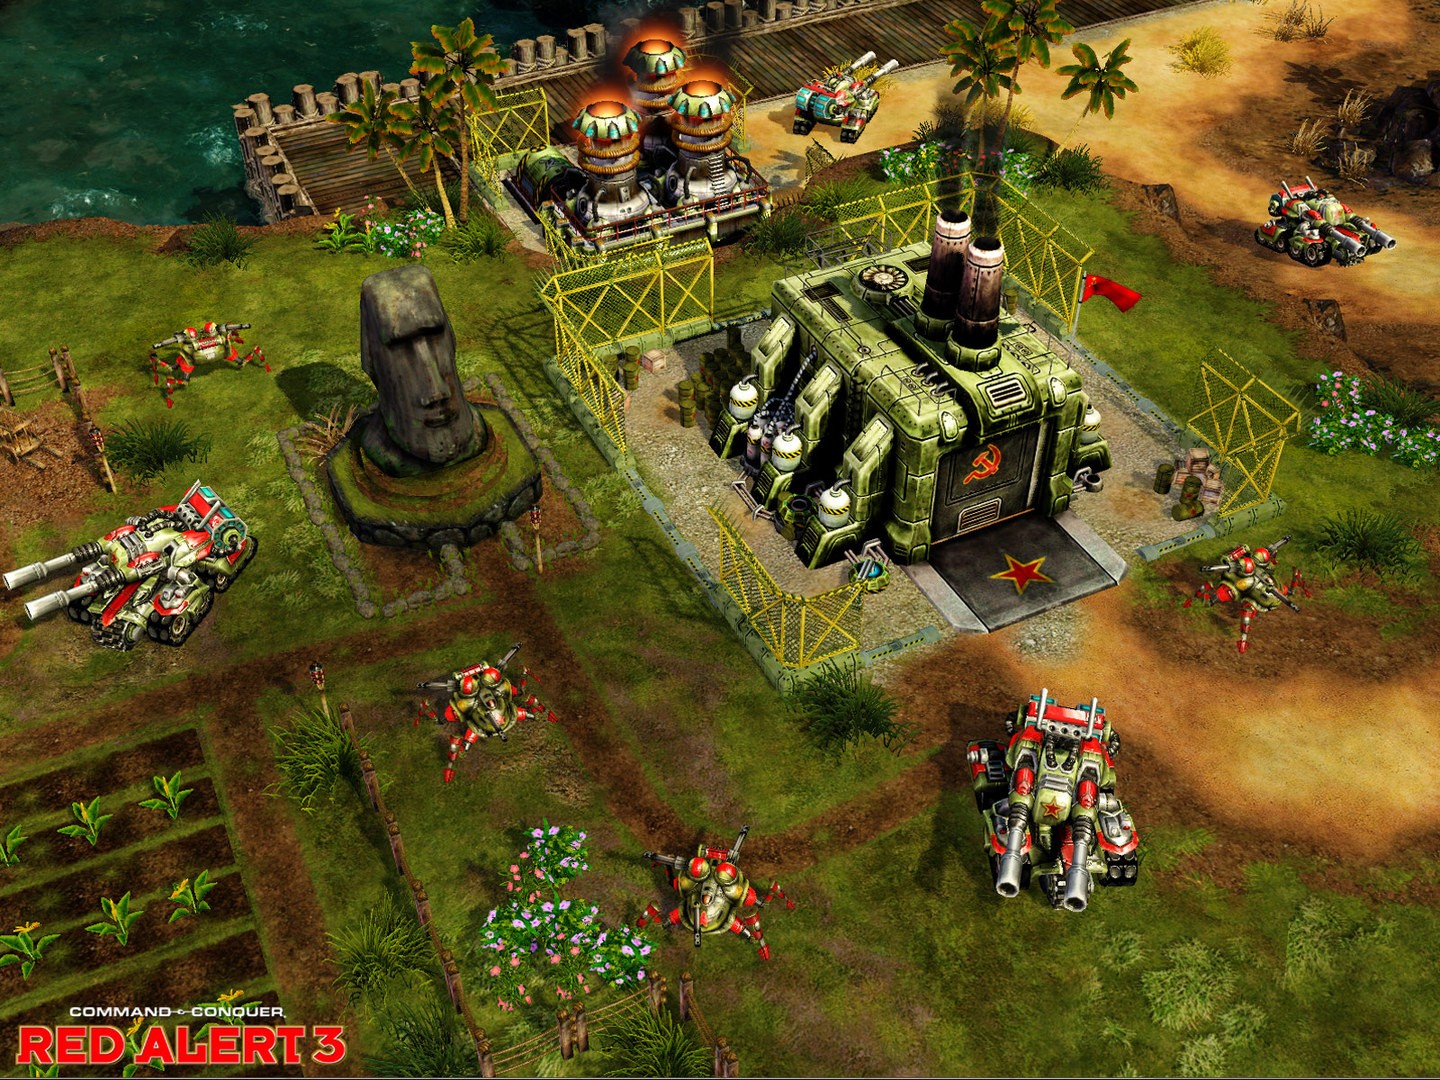 Command & Conquer™ The Ultimate Collection for PC | Origin